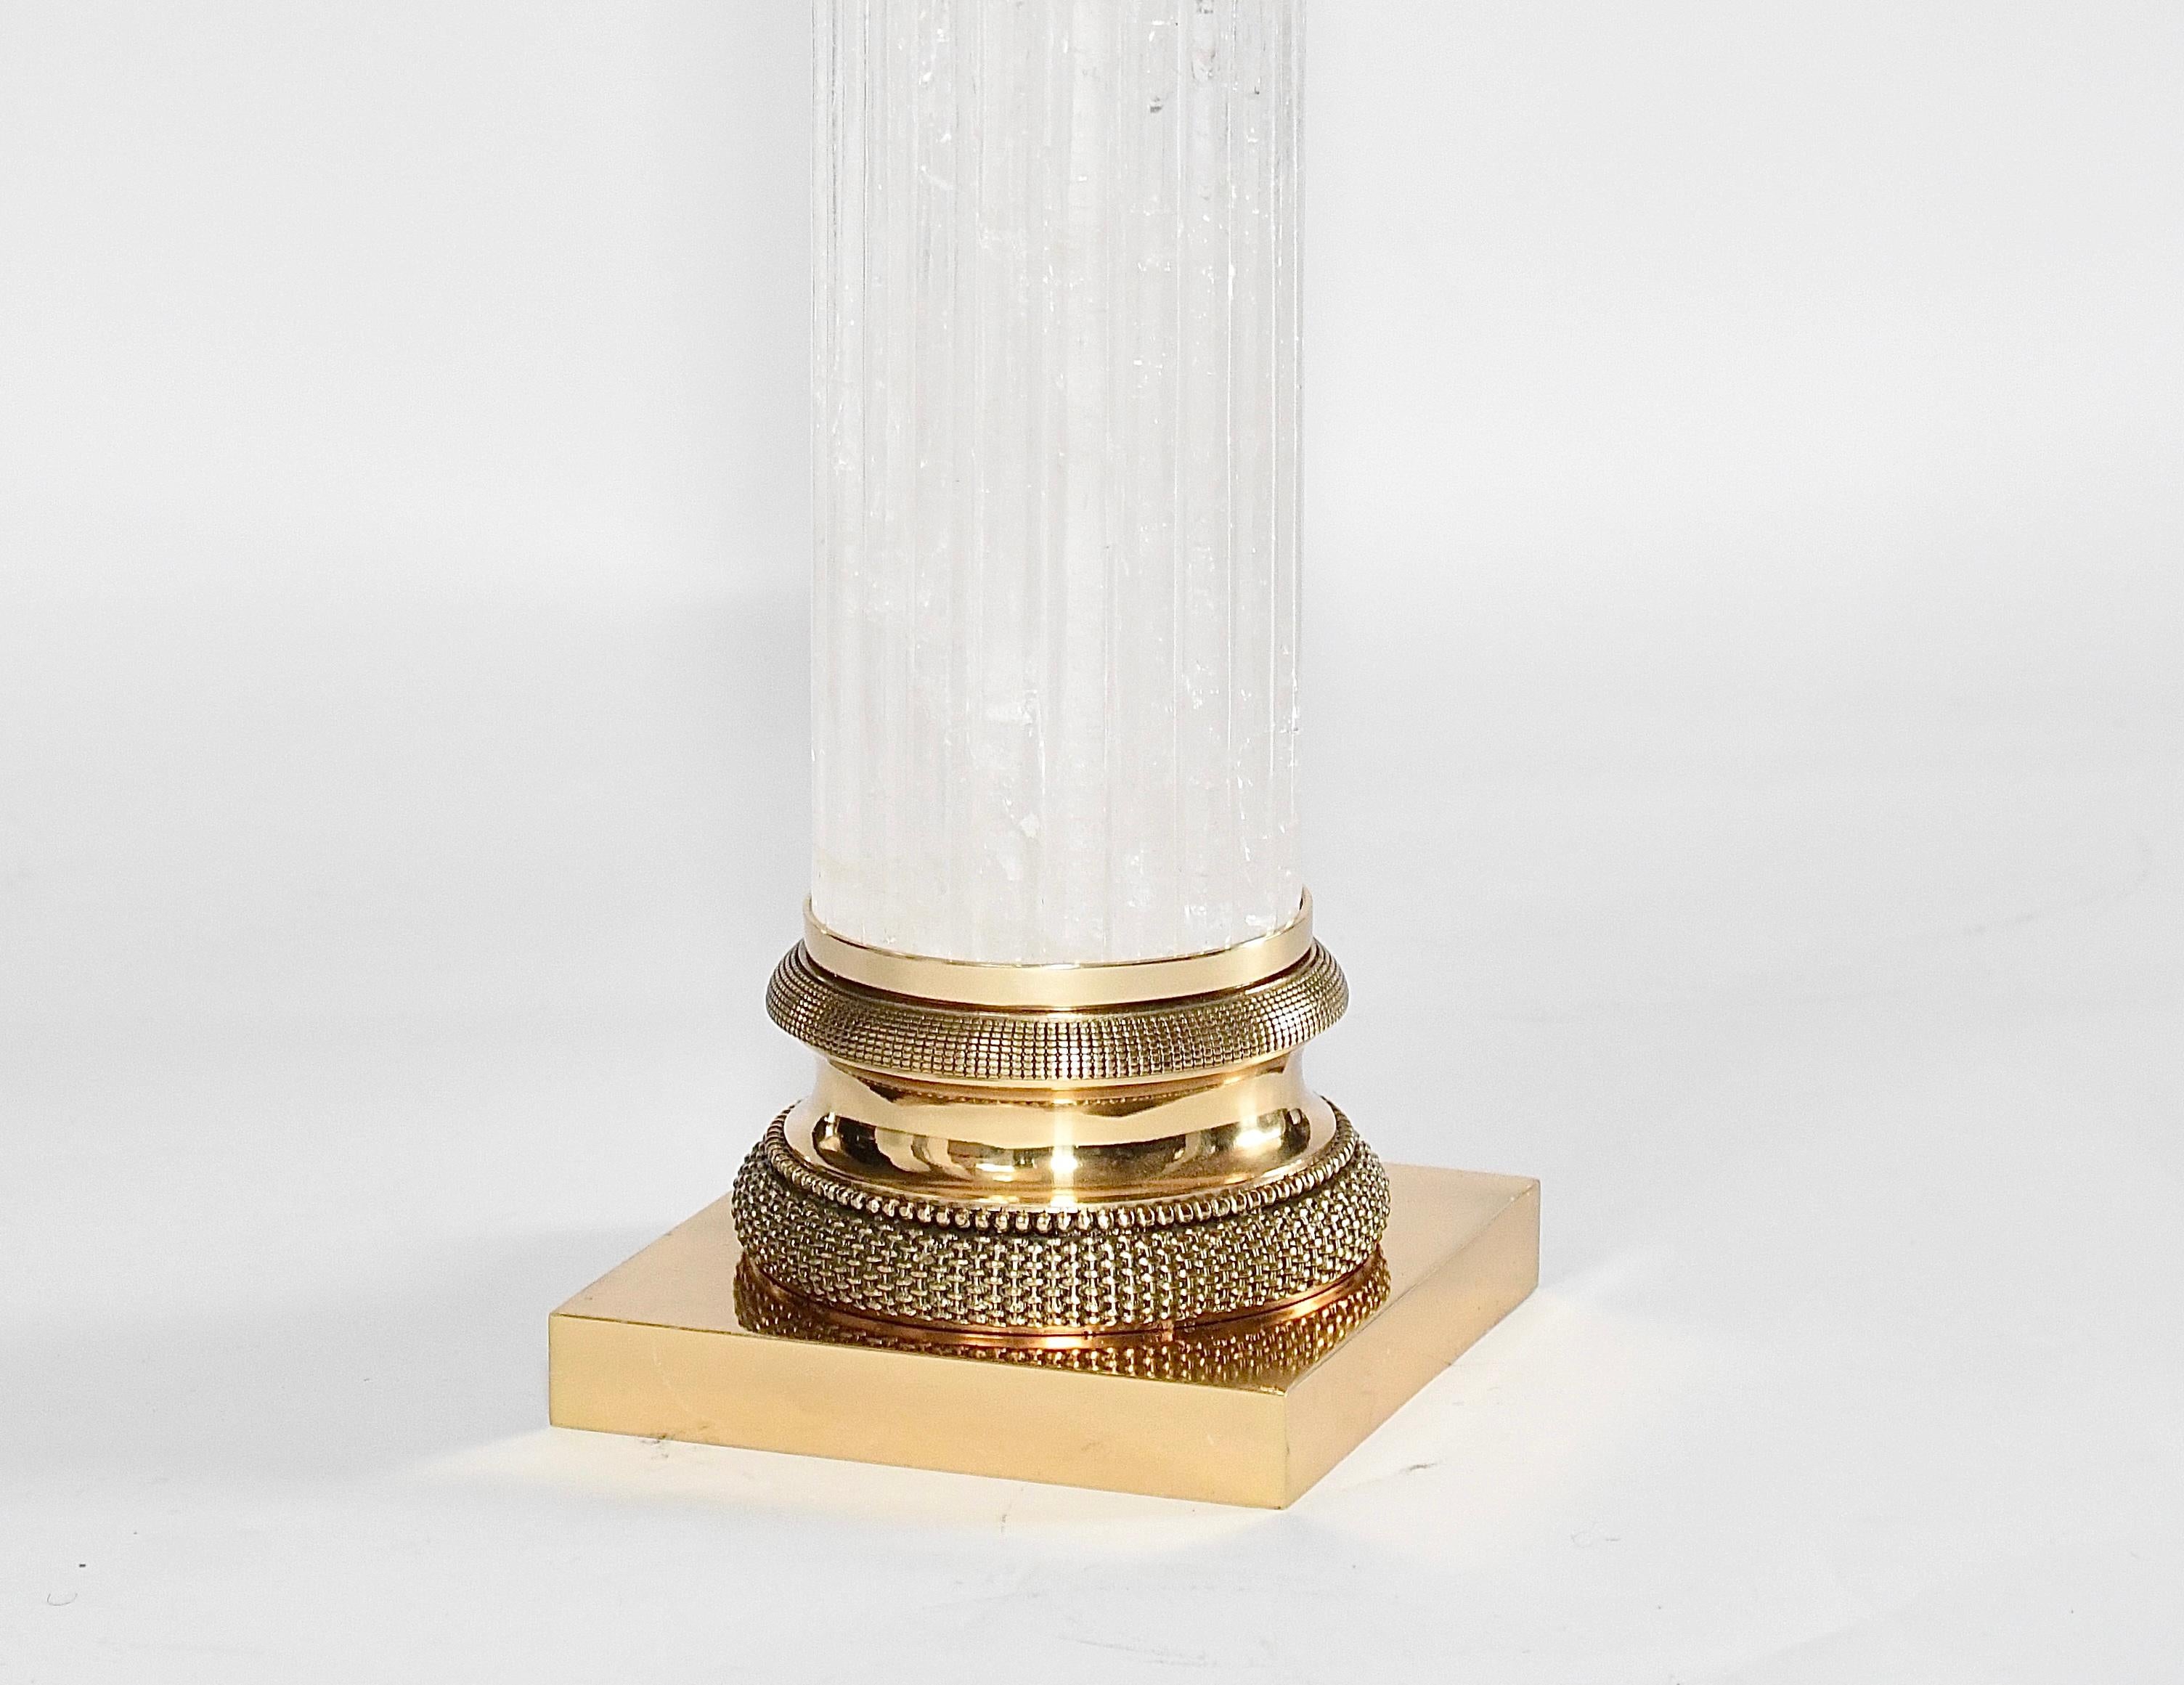 Pair of finely carved ribbed column-form rock crystal lamps with cast brass bases and decorations
Created by Phoenix Gallery
To the top of rock crystal part 17 in/H
Each lamp installed two sockets
lamp shades not included.